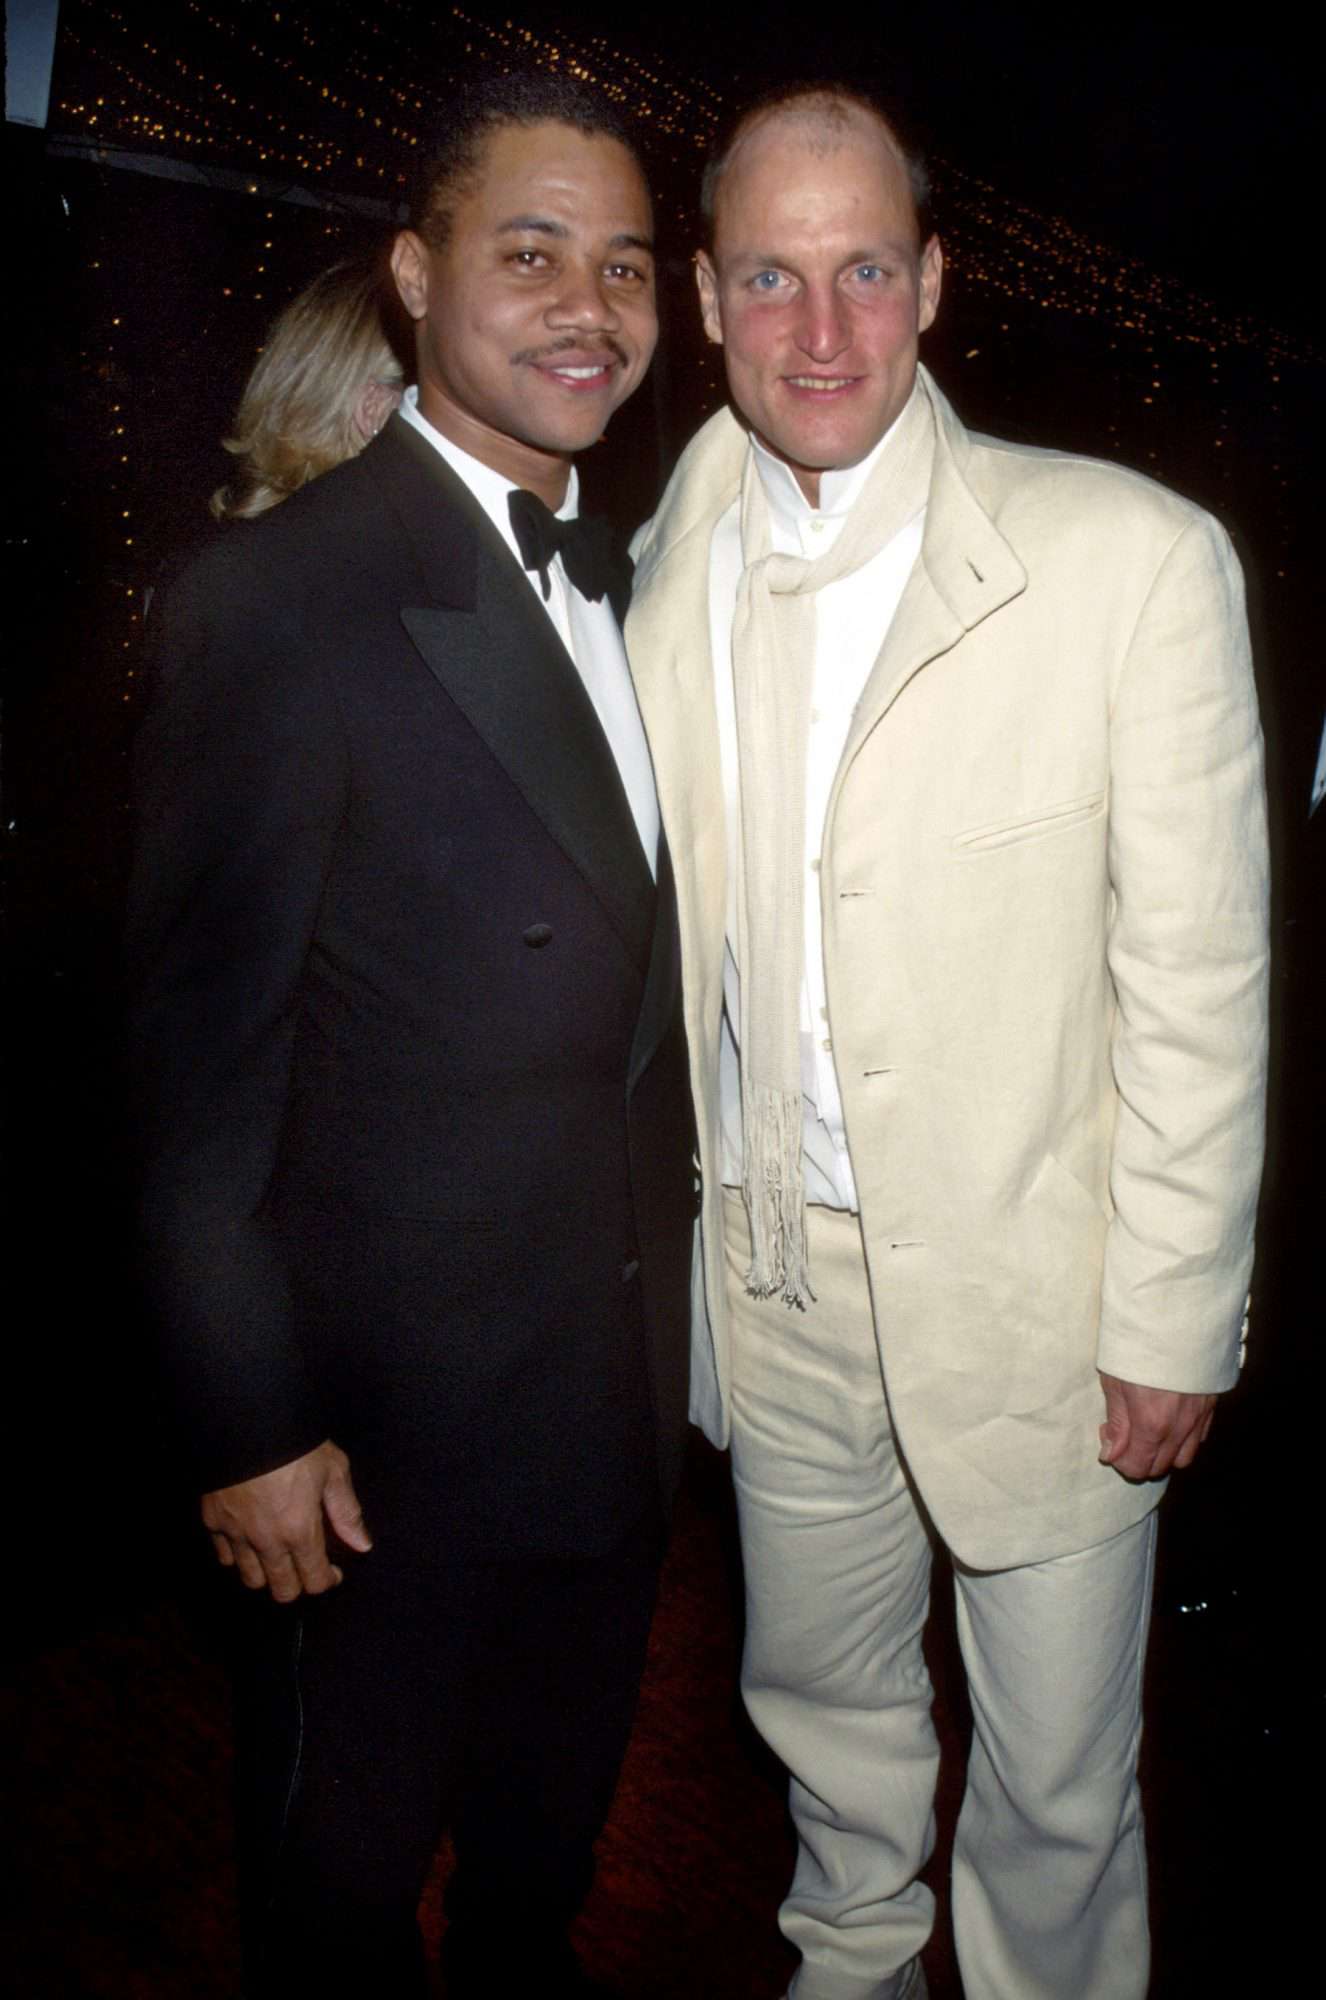 Best Supporting Actor Nominee Cuba Gooding Jr. (Jerry Maguire) and Best Actor in a Drama Nominee Woody Harrelson (The People vs. Larry Flynt)